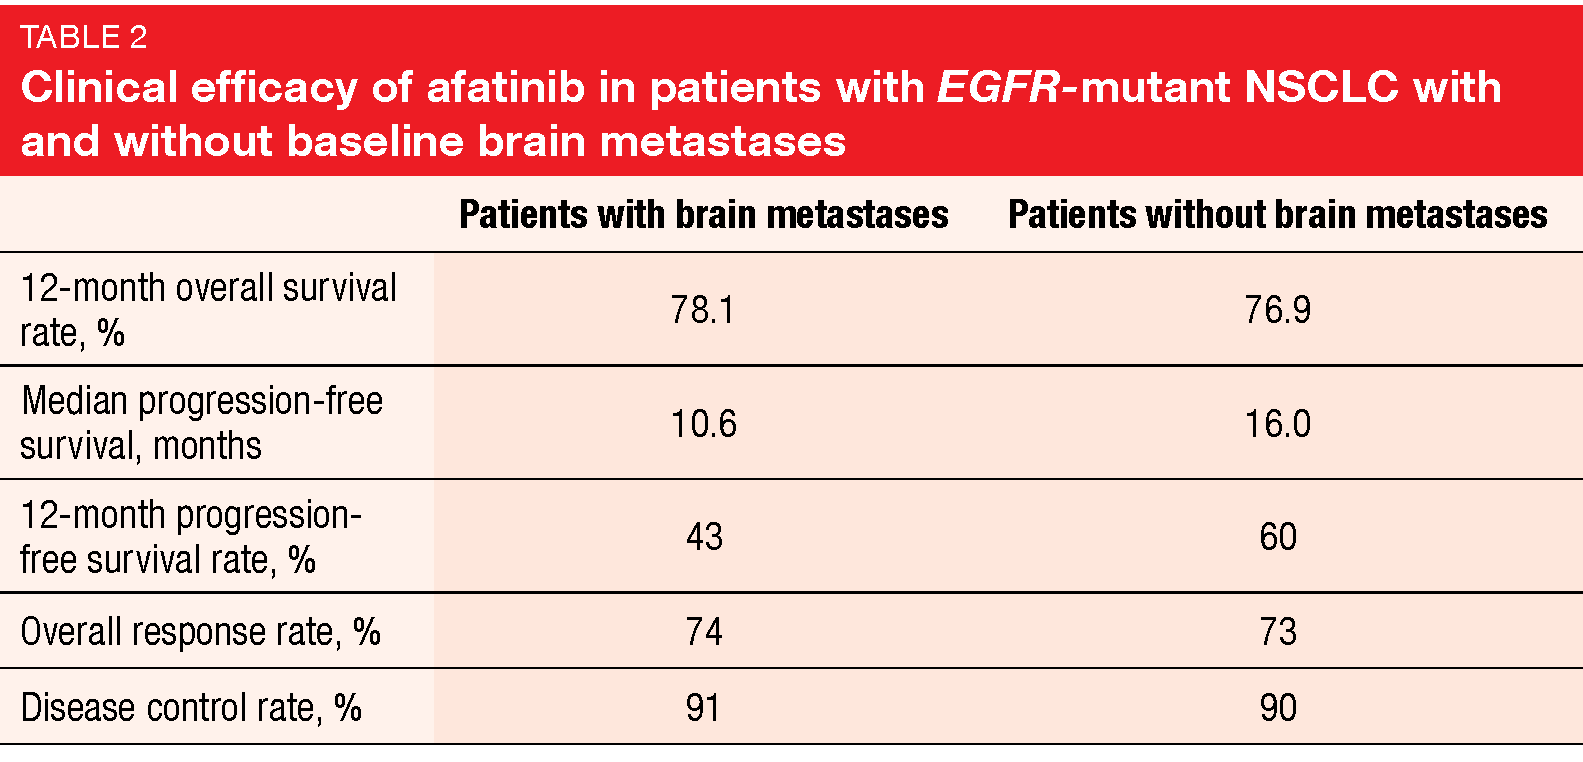 Clinical efficacy of afatinib in patients with EGFR-mutant NSCLC with and without baseline brain metastases